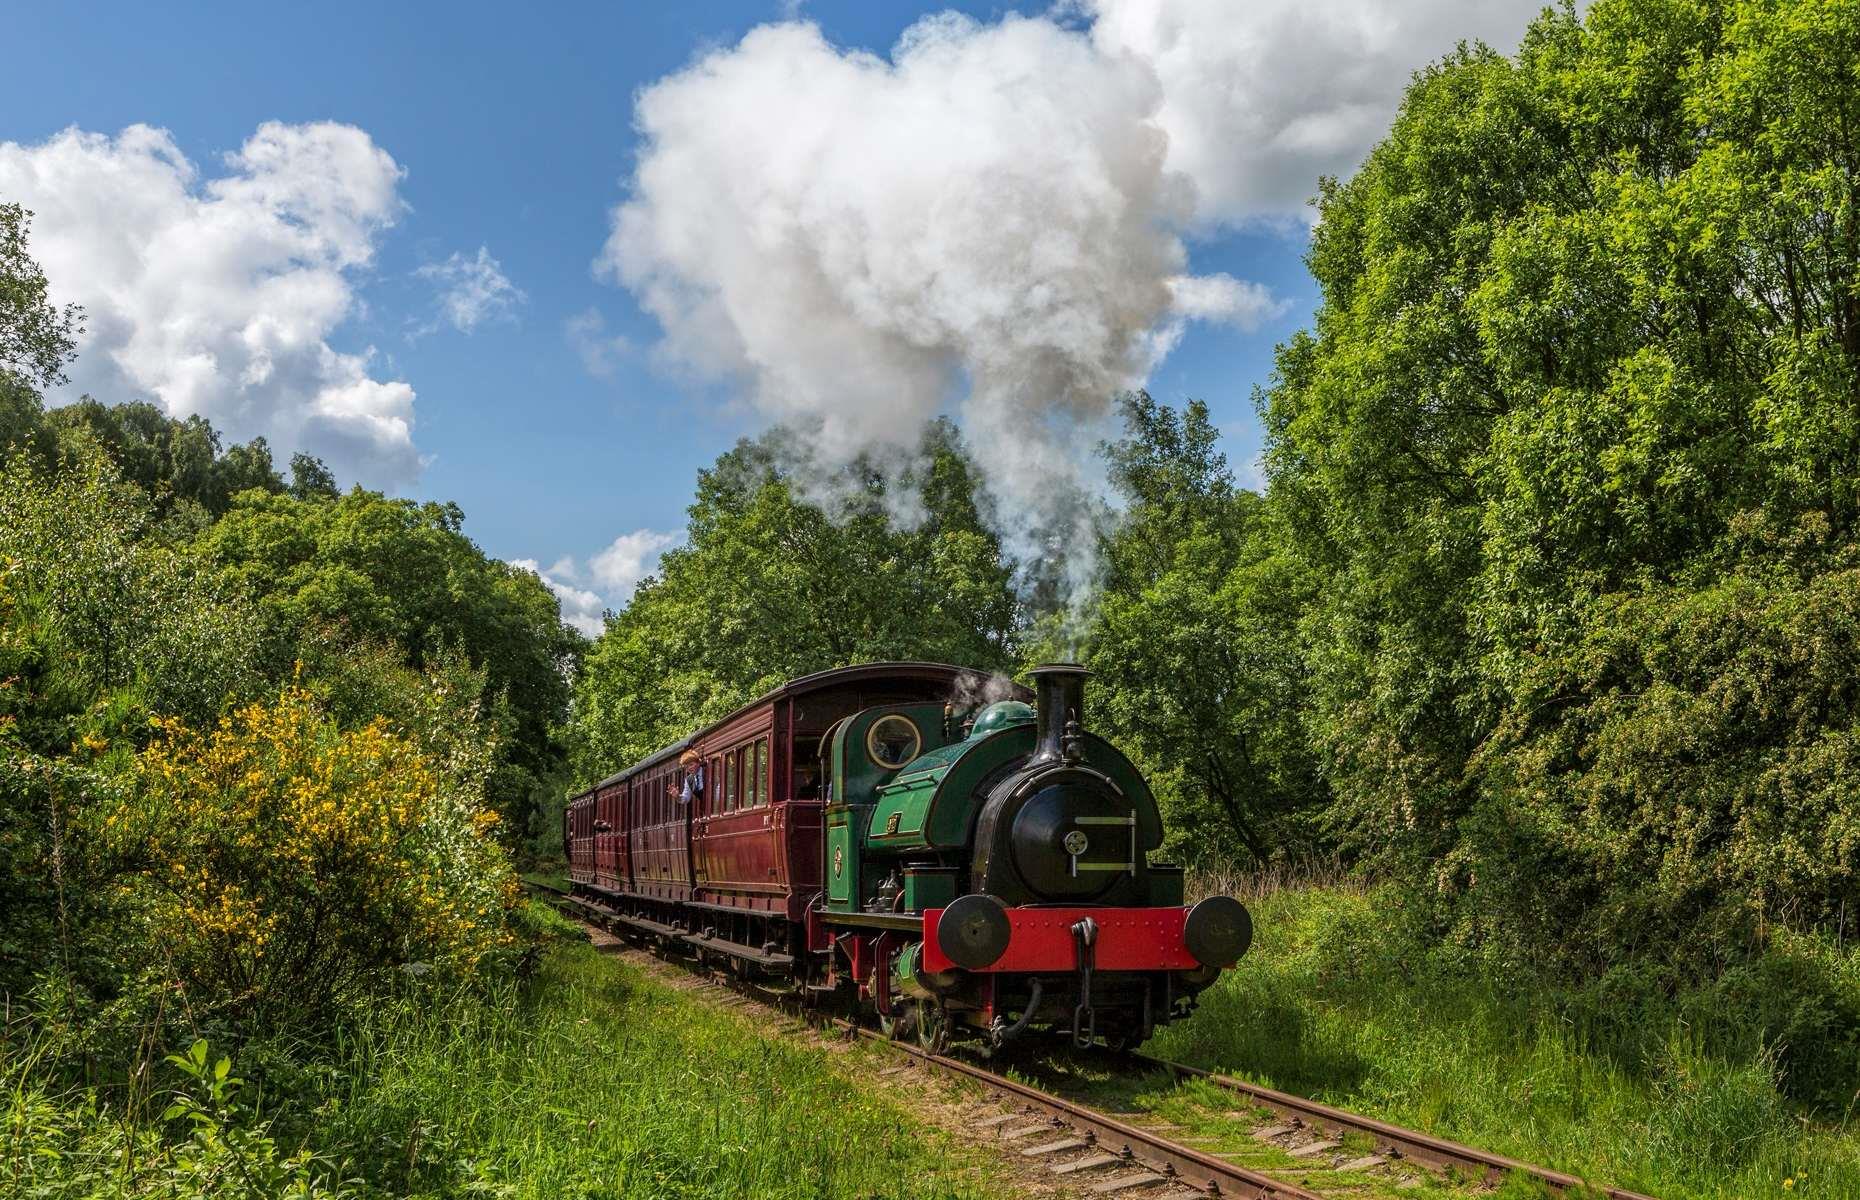 <p>With nearly 300 years of history to its name, the <a href="https://www.tanfield-railway.co.uk/">Tanfield Railway</a> is one of the oldest railways in the world. Its first wagonway was built in 1725 and the railway has been operating its service through northeast England ever since. Its beautifully preserved Victorian steam trains whisk passengers on a six-mile (9.7km) long scenic journey between East Tanfield and Gateshead, through the picturesque Causey Valley and rolling countryside.</p>